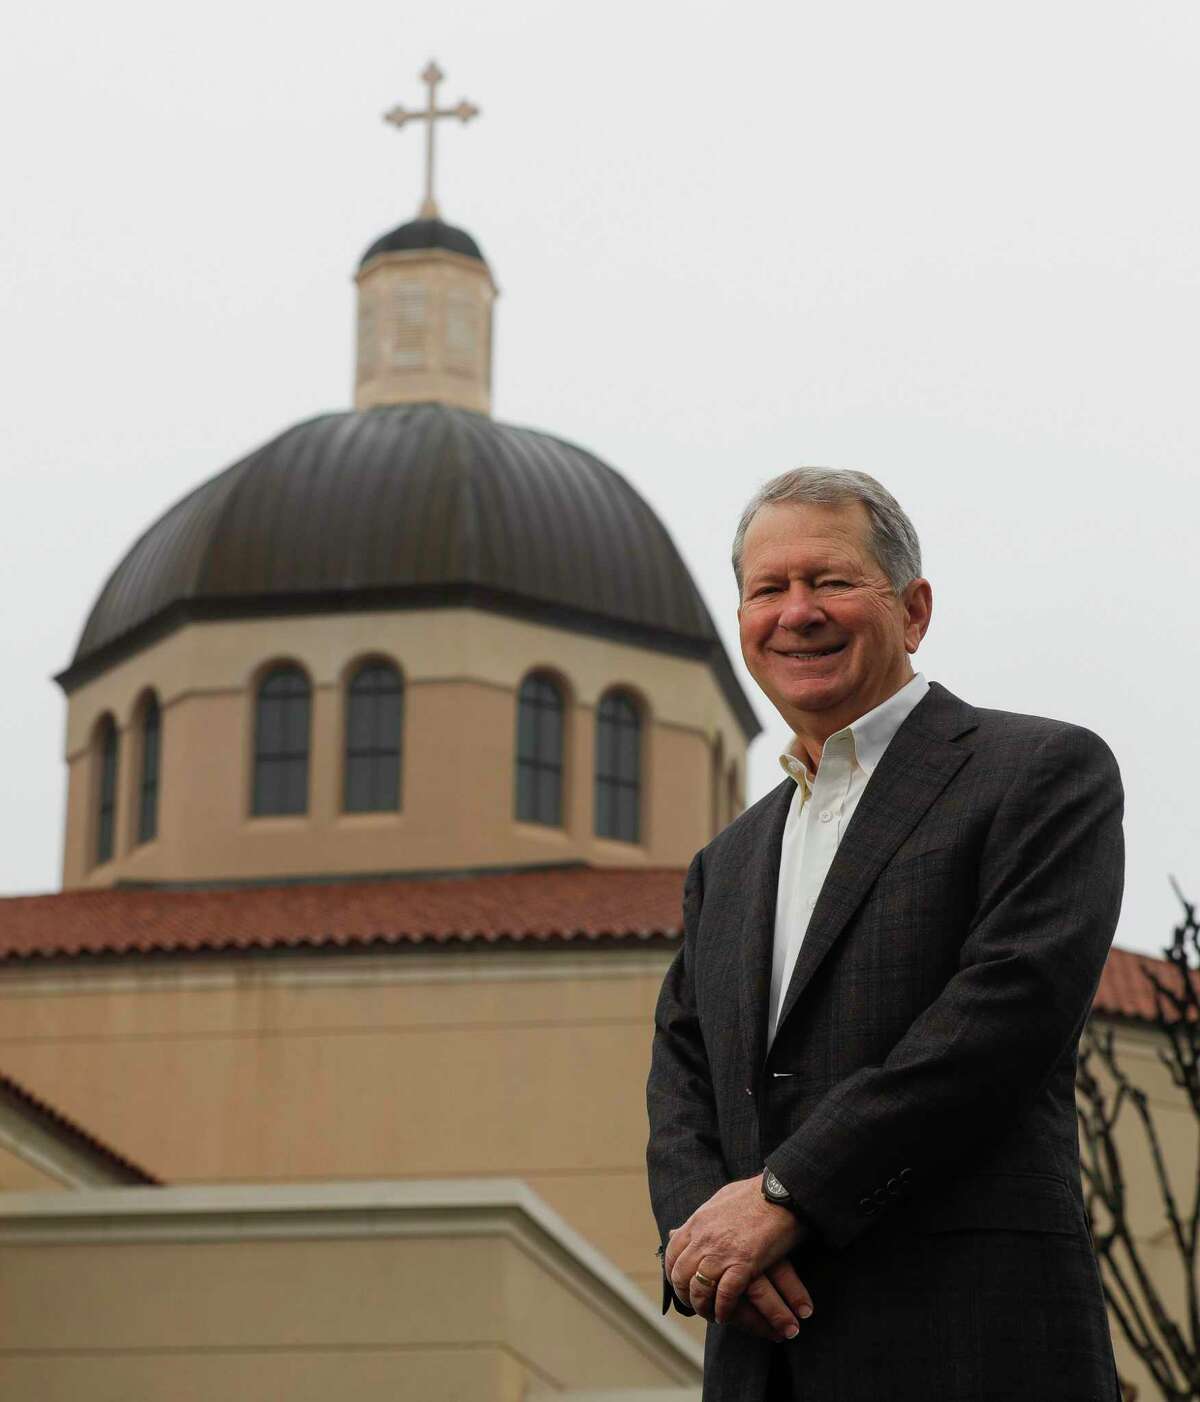 Senior Pastor Ed Robb III will retire as senior pastor at The Woodlands United Methodist Church on June 30. Robb, who founded the church in 1978, leaves the congregation after 43 years.